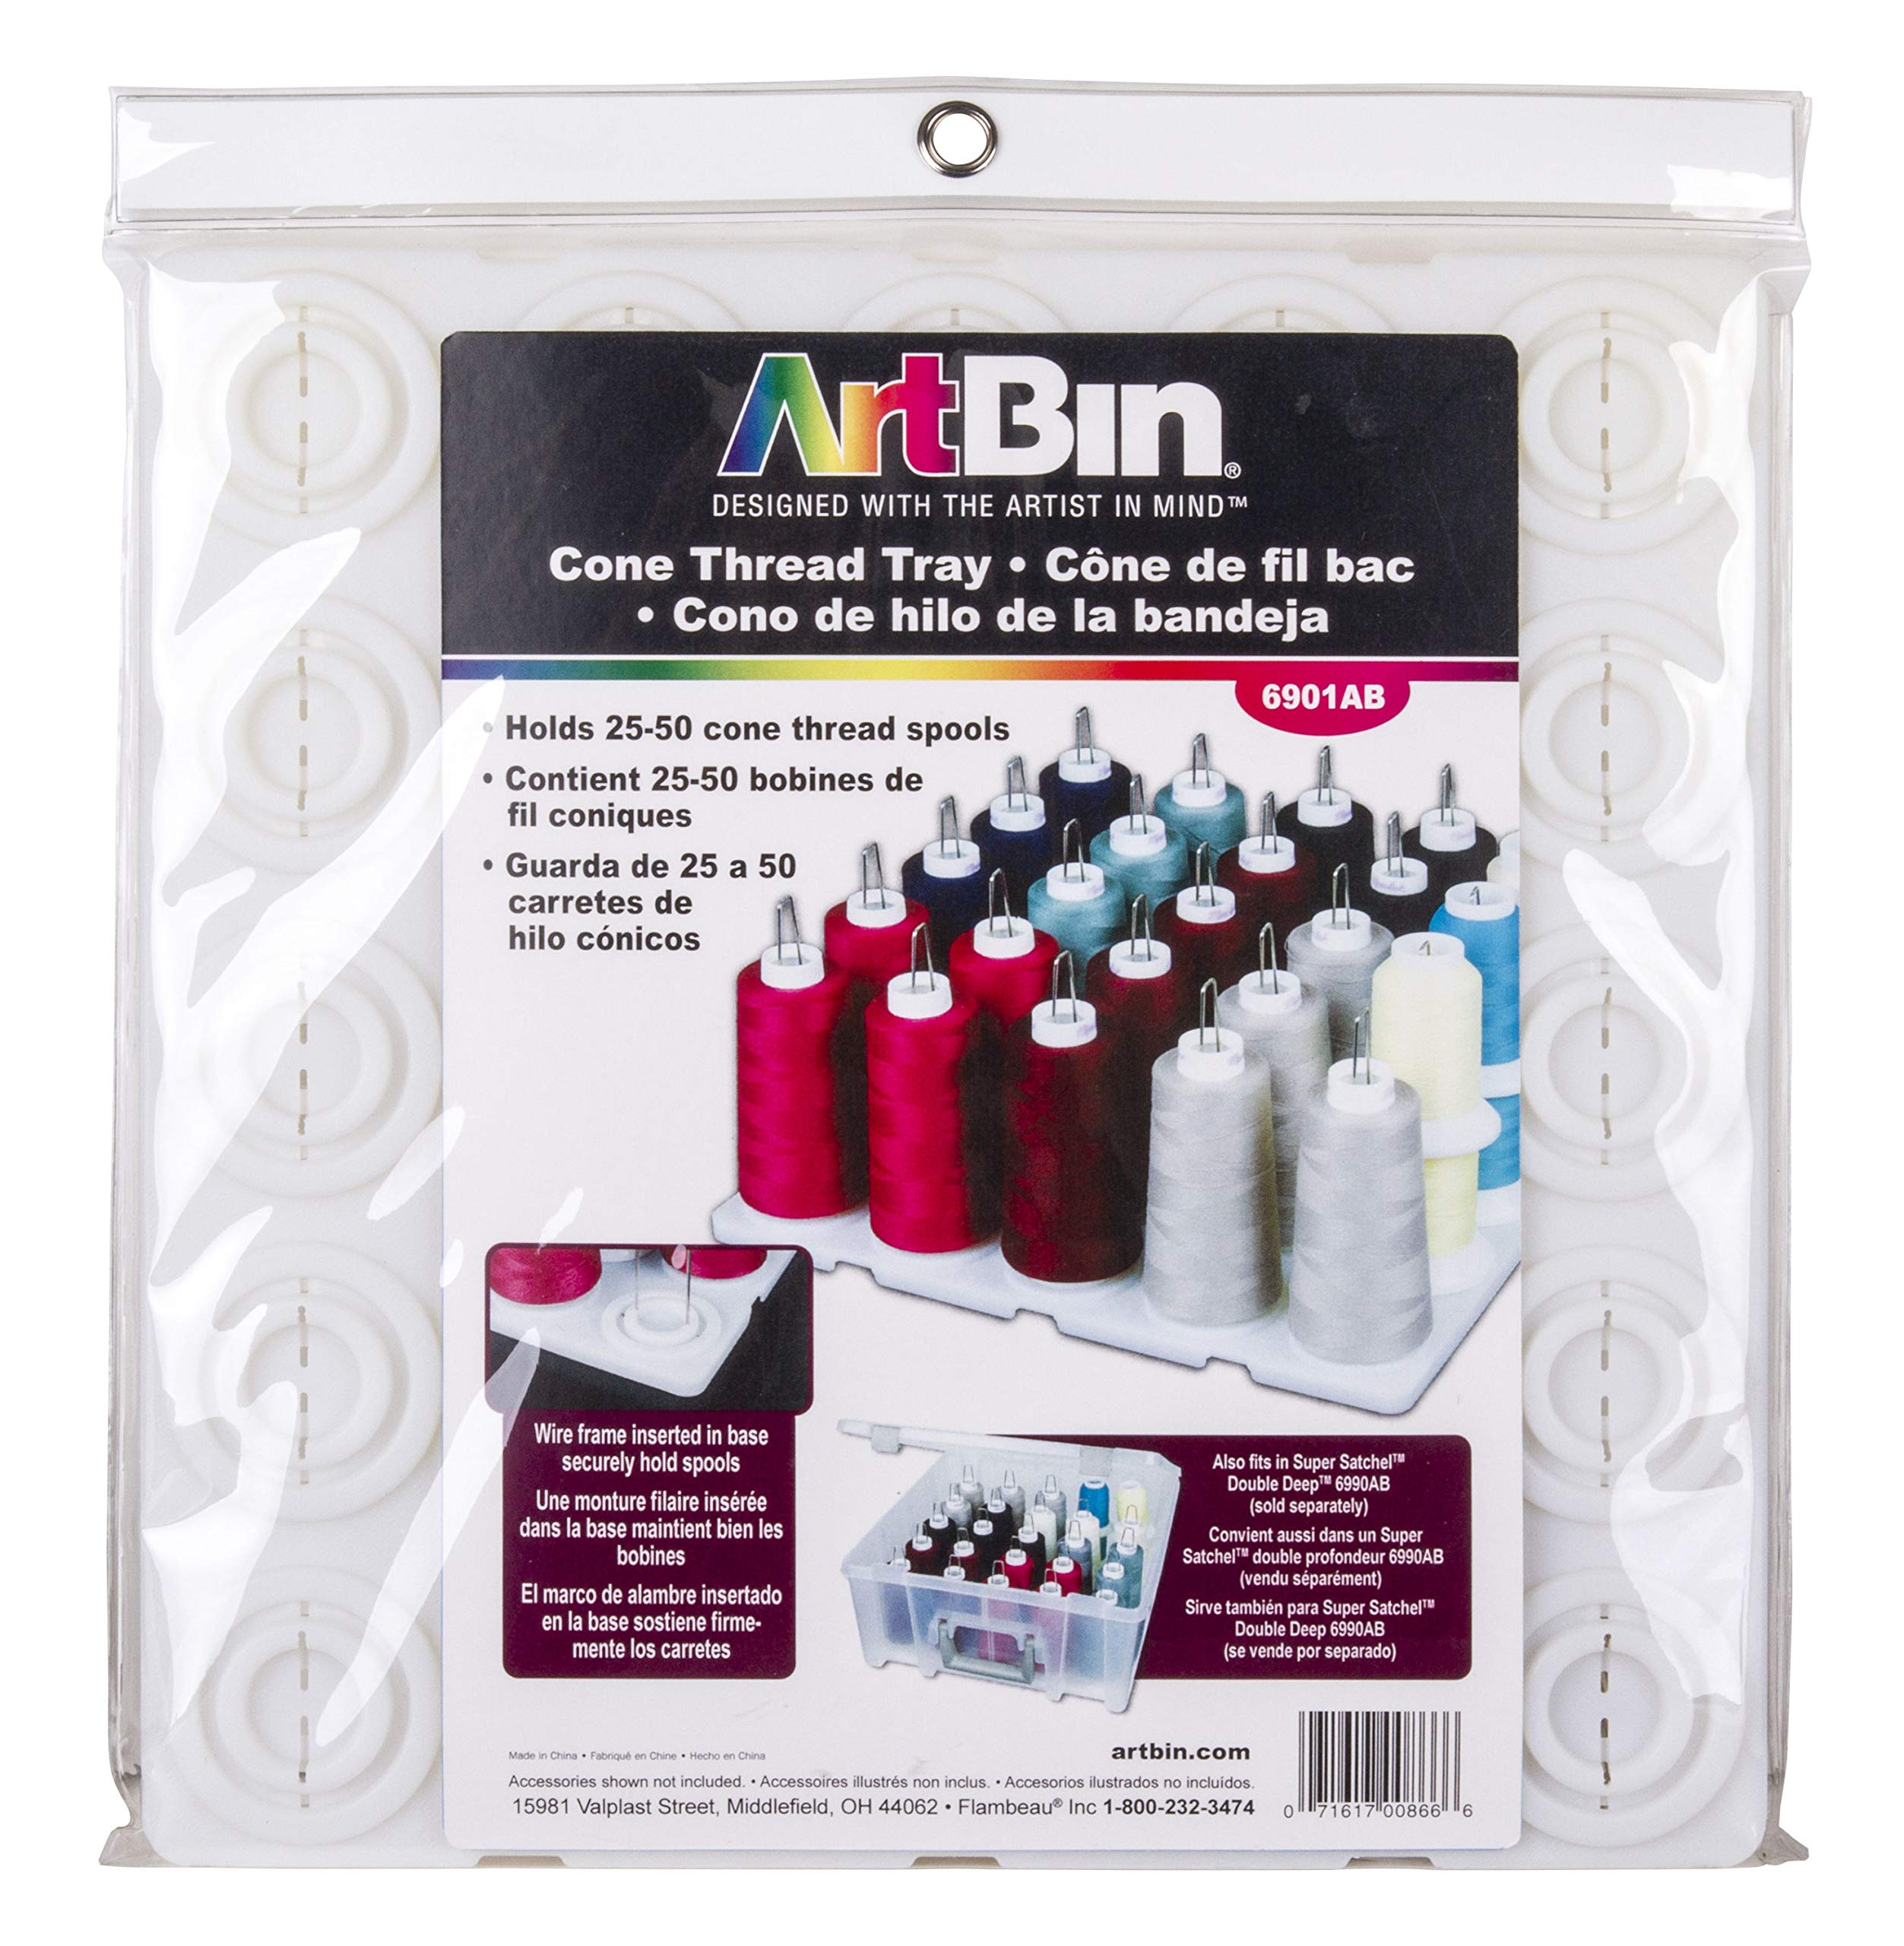 ArtBin 6901AB Cone Thread Tray, Sewing & Embroidery Serger Cone Thread Spool Assortment Organizer, Super Satchel System Accessory, Up To 25 Traditional Spools or Up To 50 Mini Spools, White